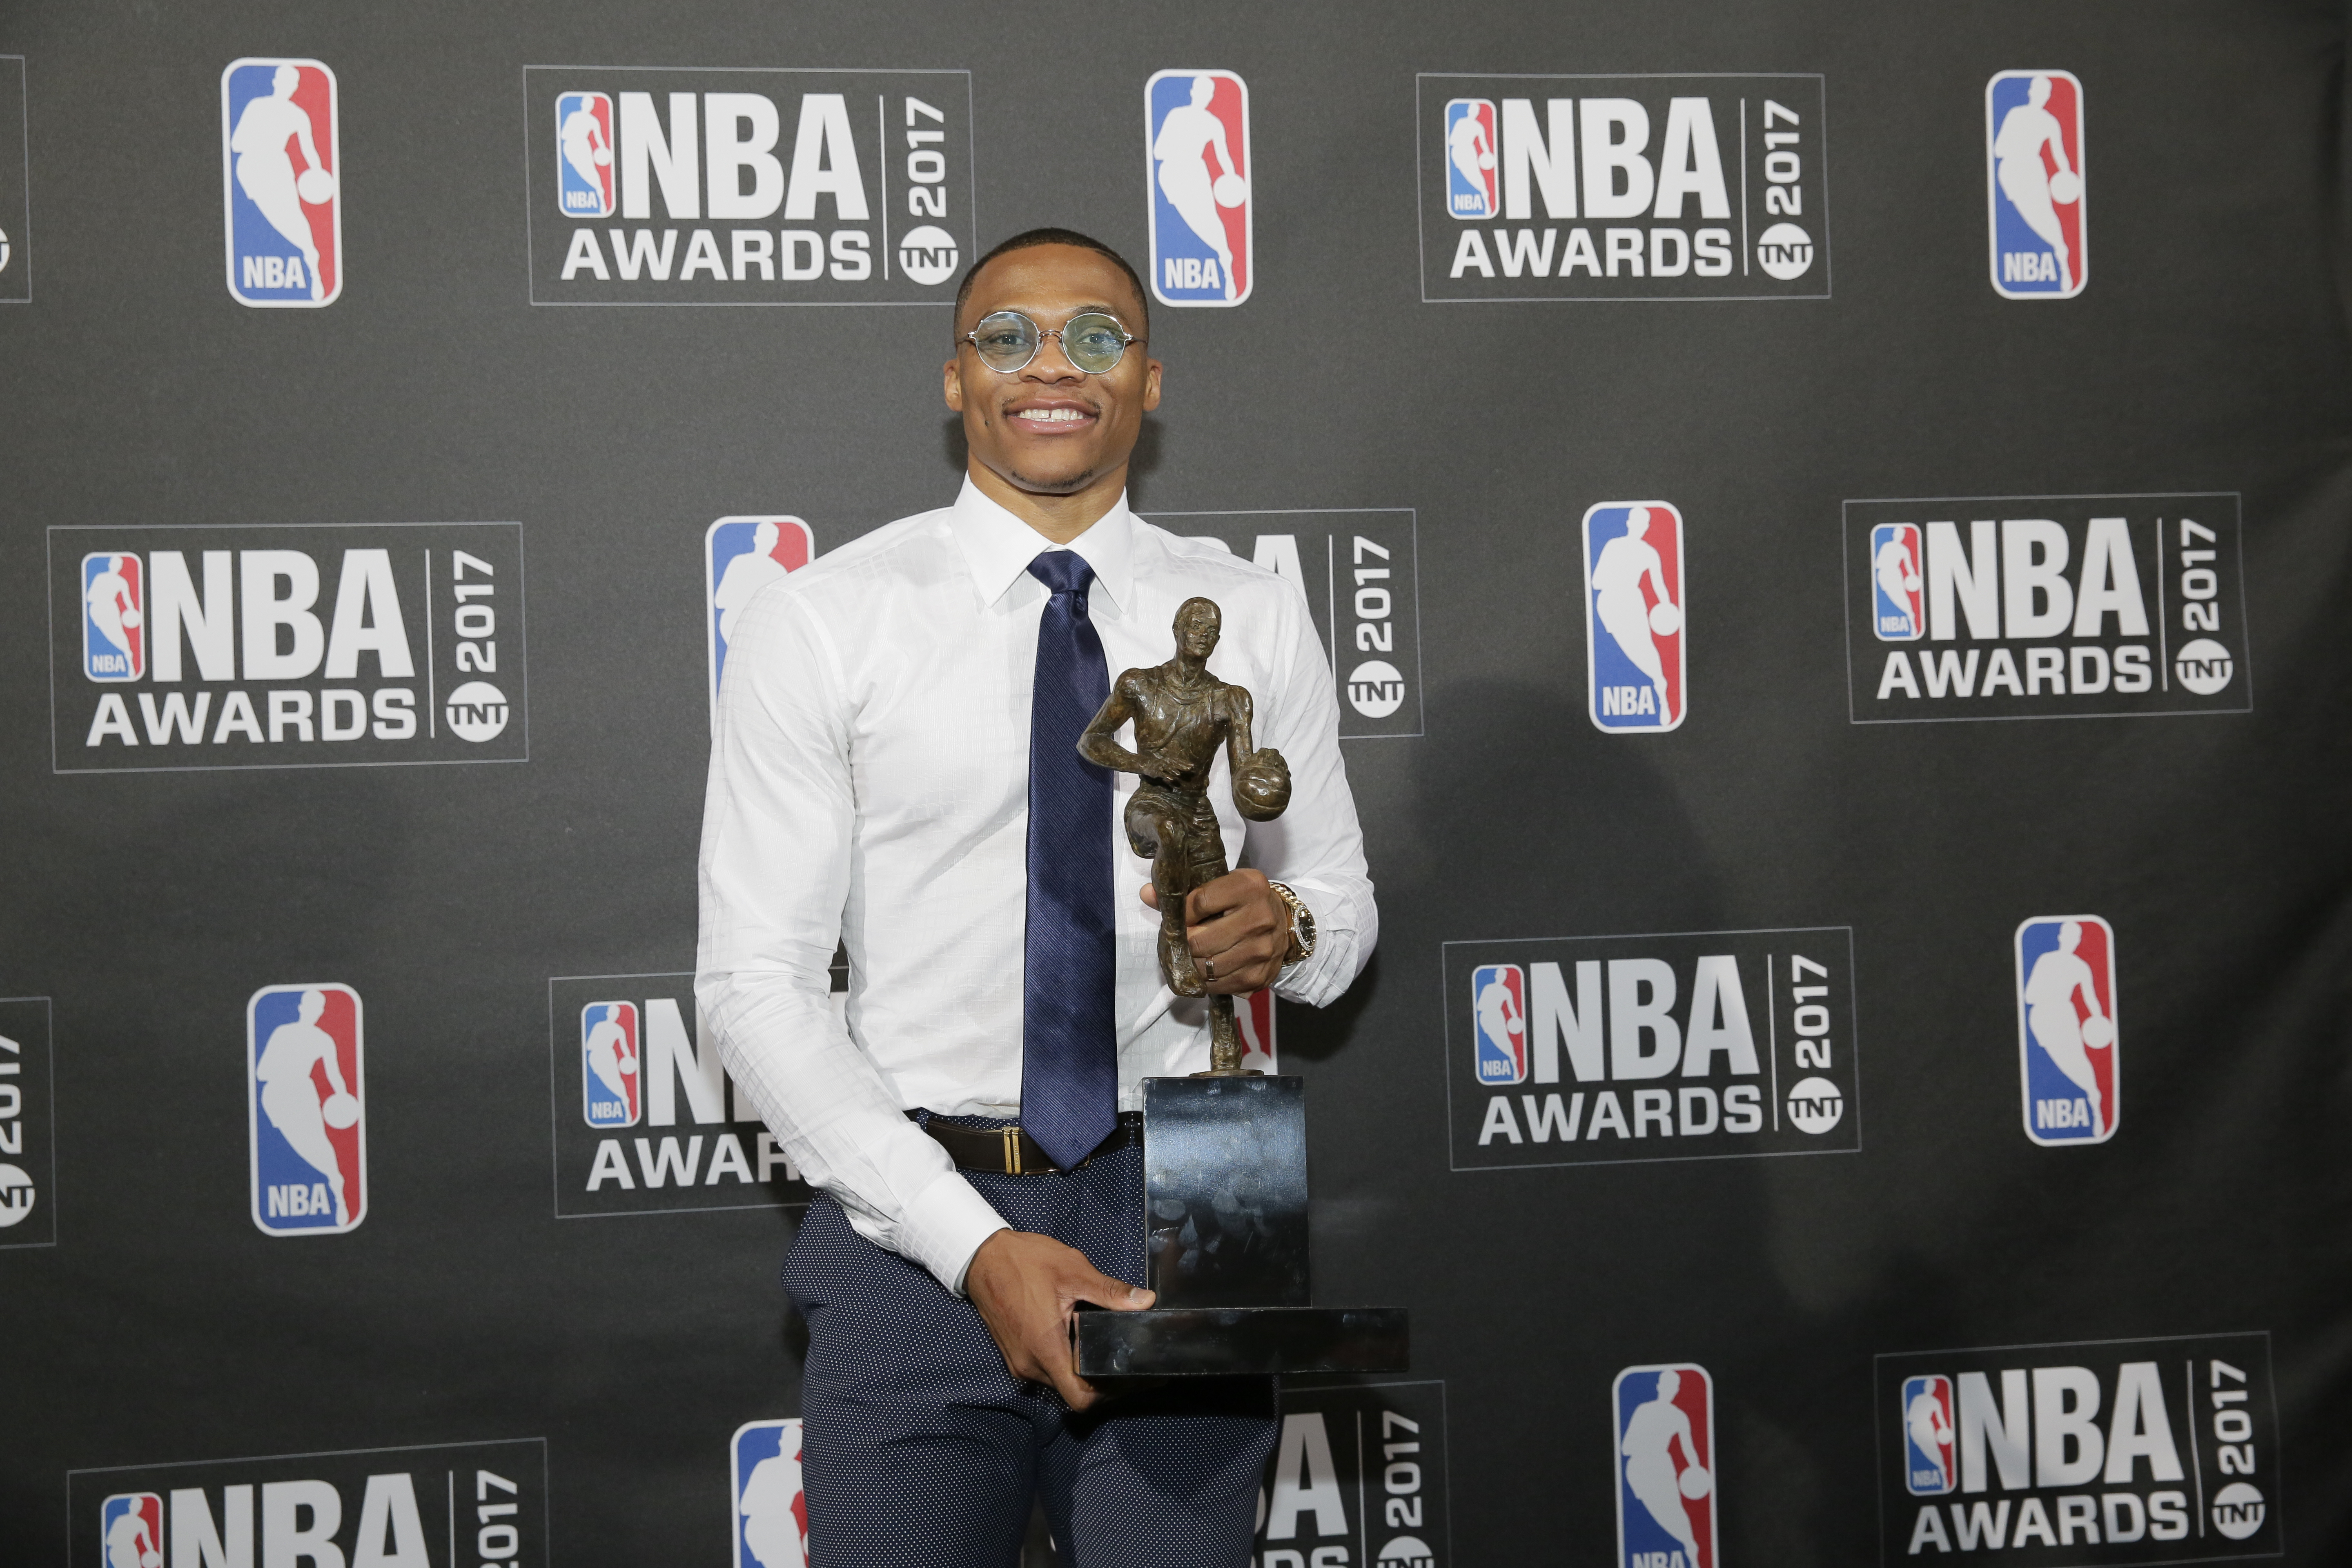 Why Russell Westbrook WILL NOT Win the 2017 NBA MVP! 